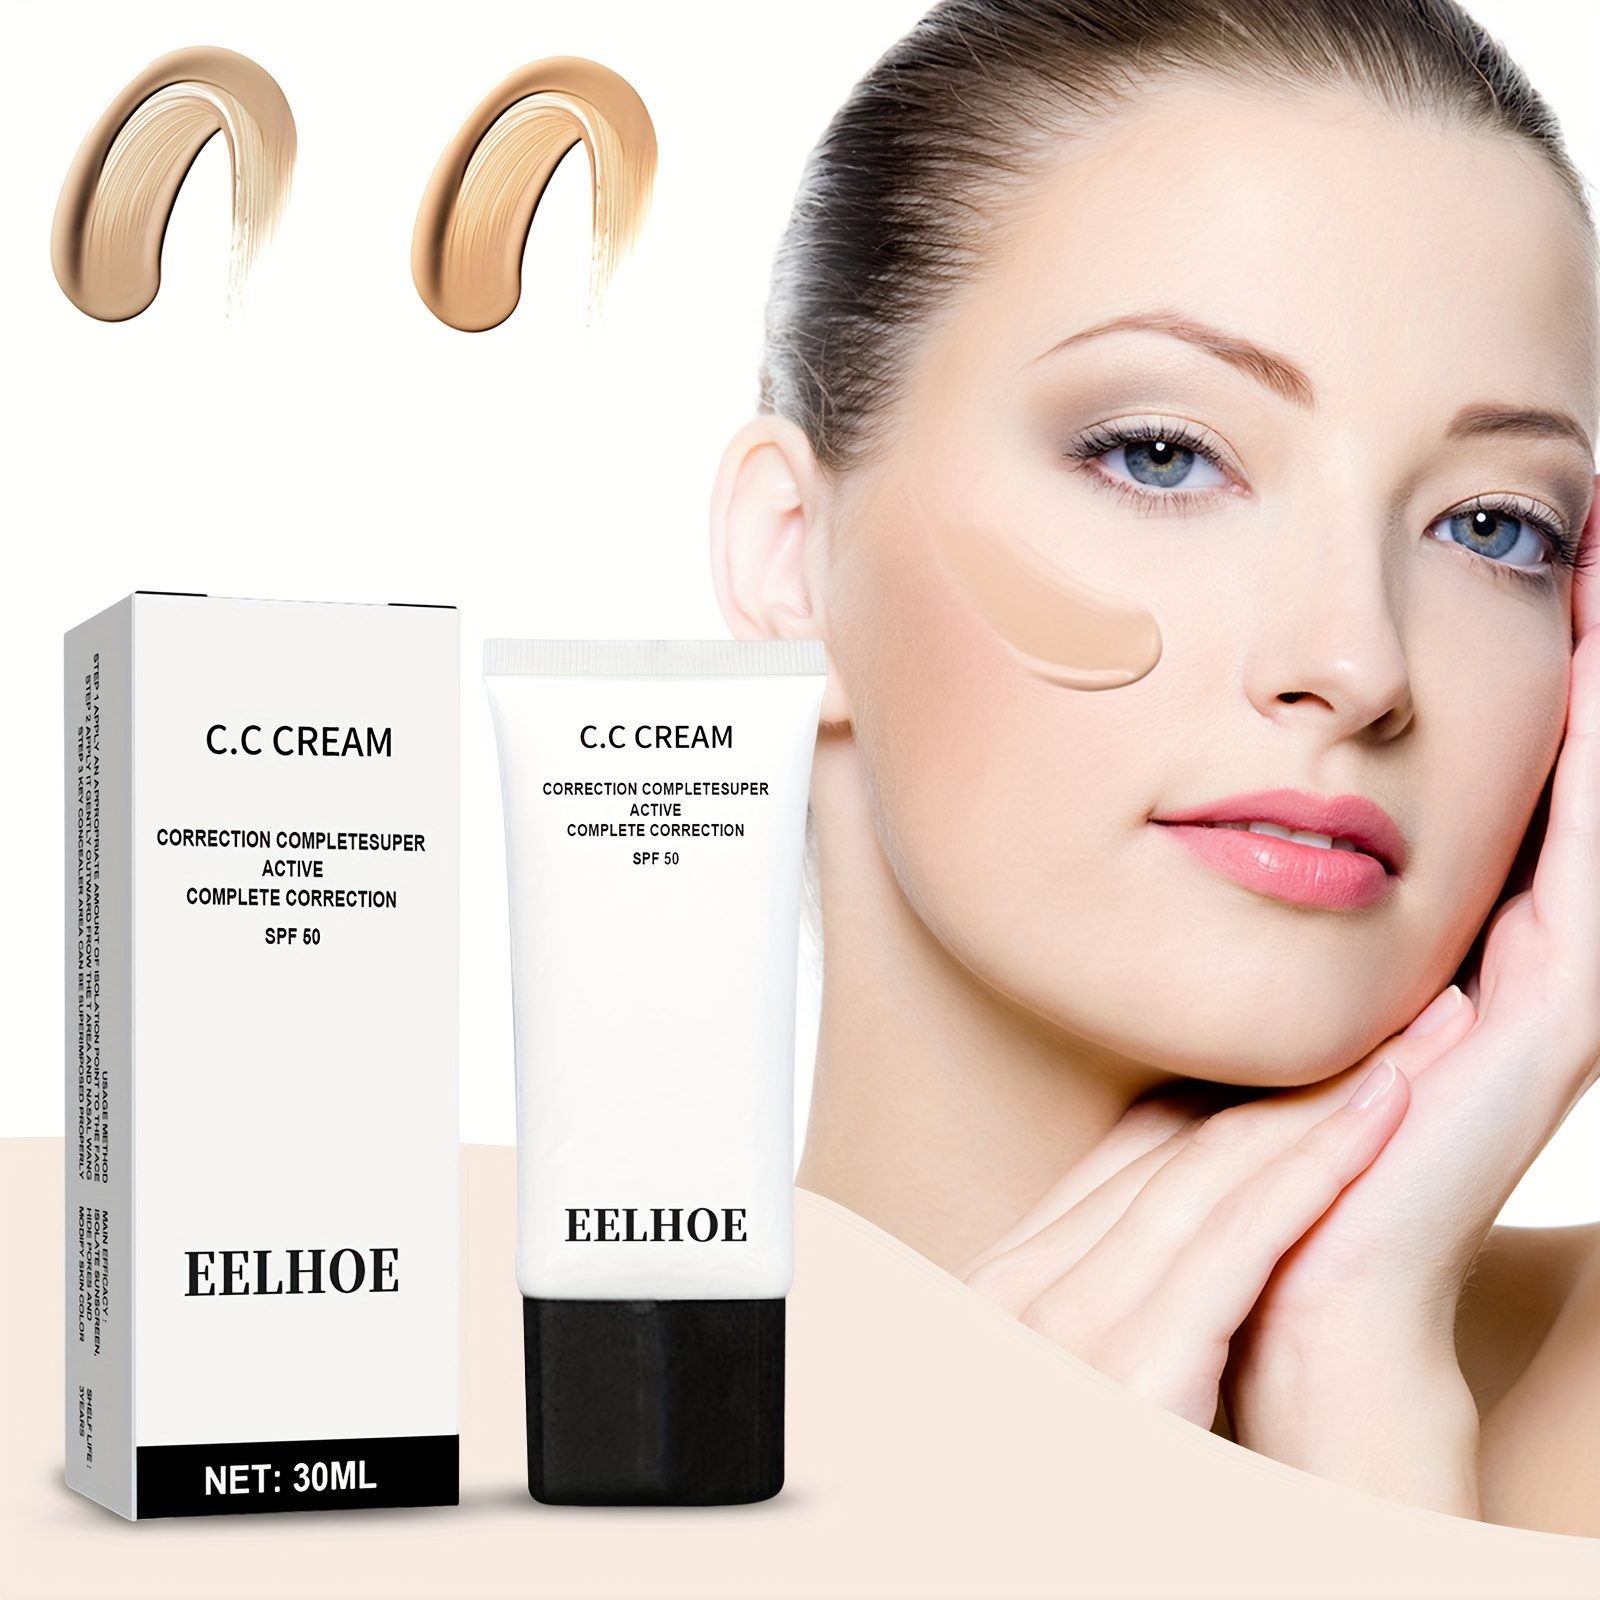 Image Beauty Clear Repair Face Isolation Natural Concealer